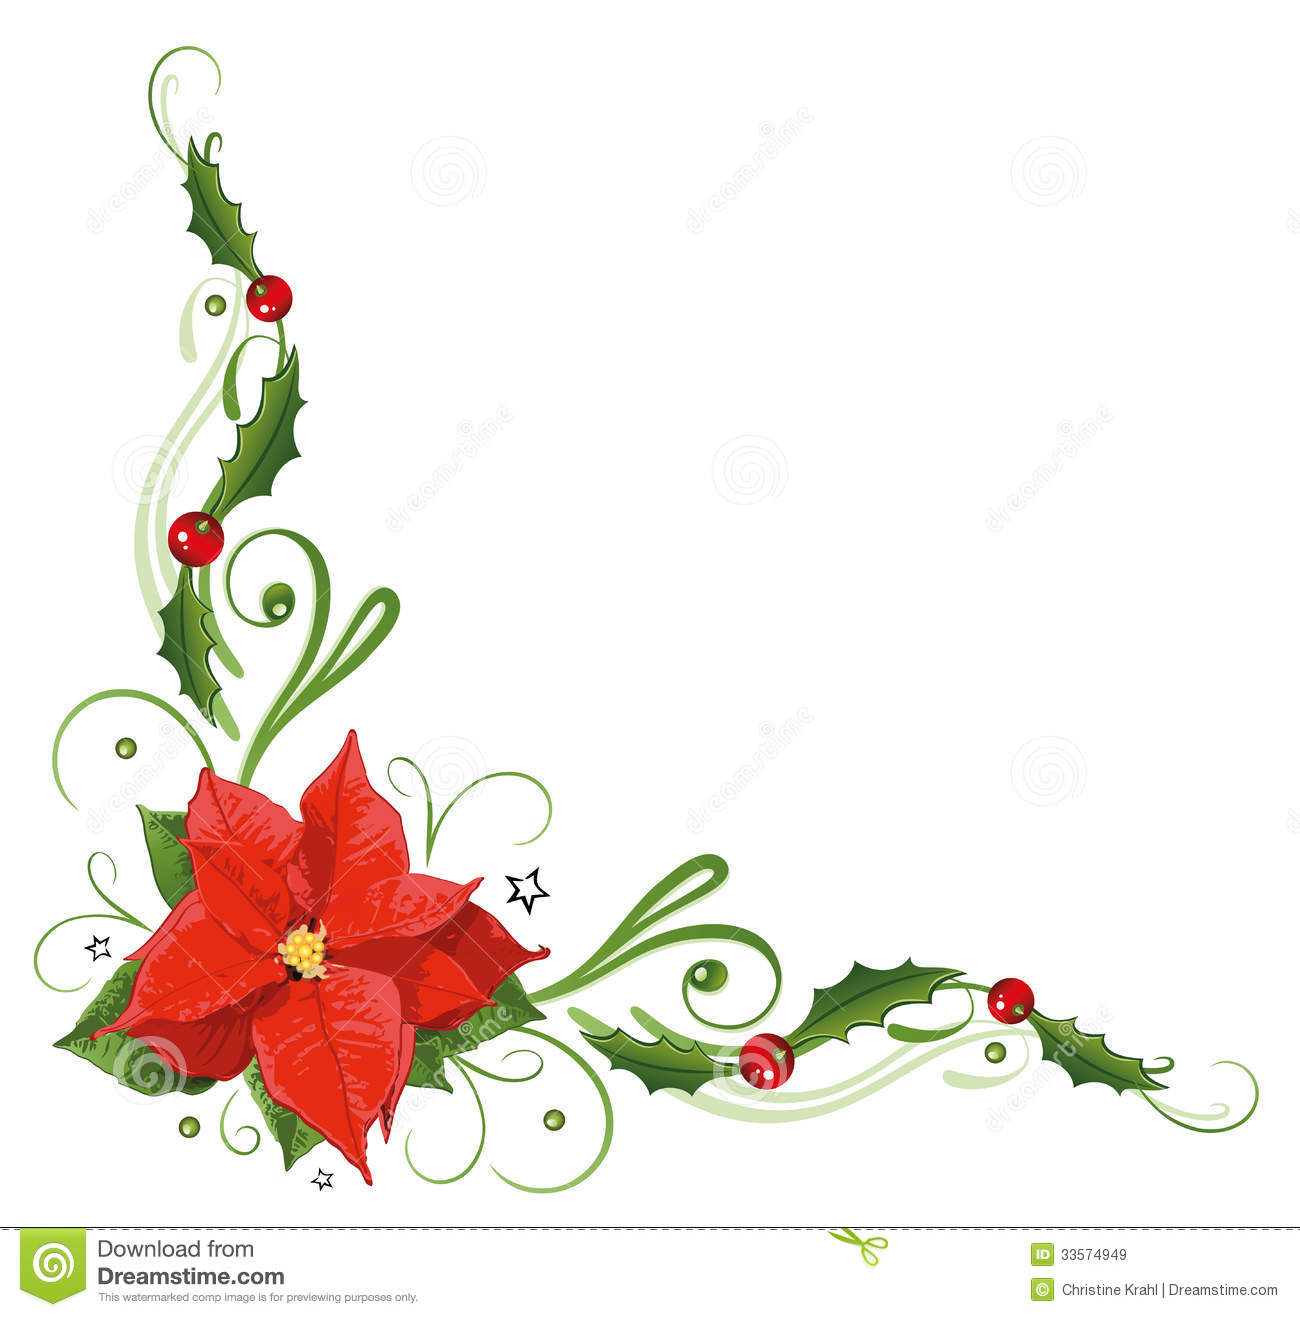 Christmas, poinsettia, holly Royalty Free Stock Images